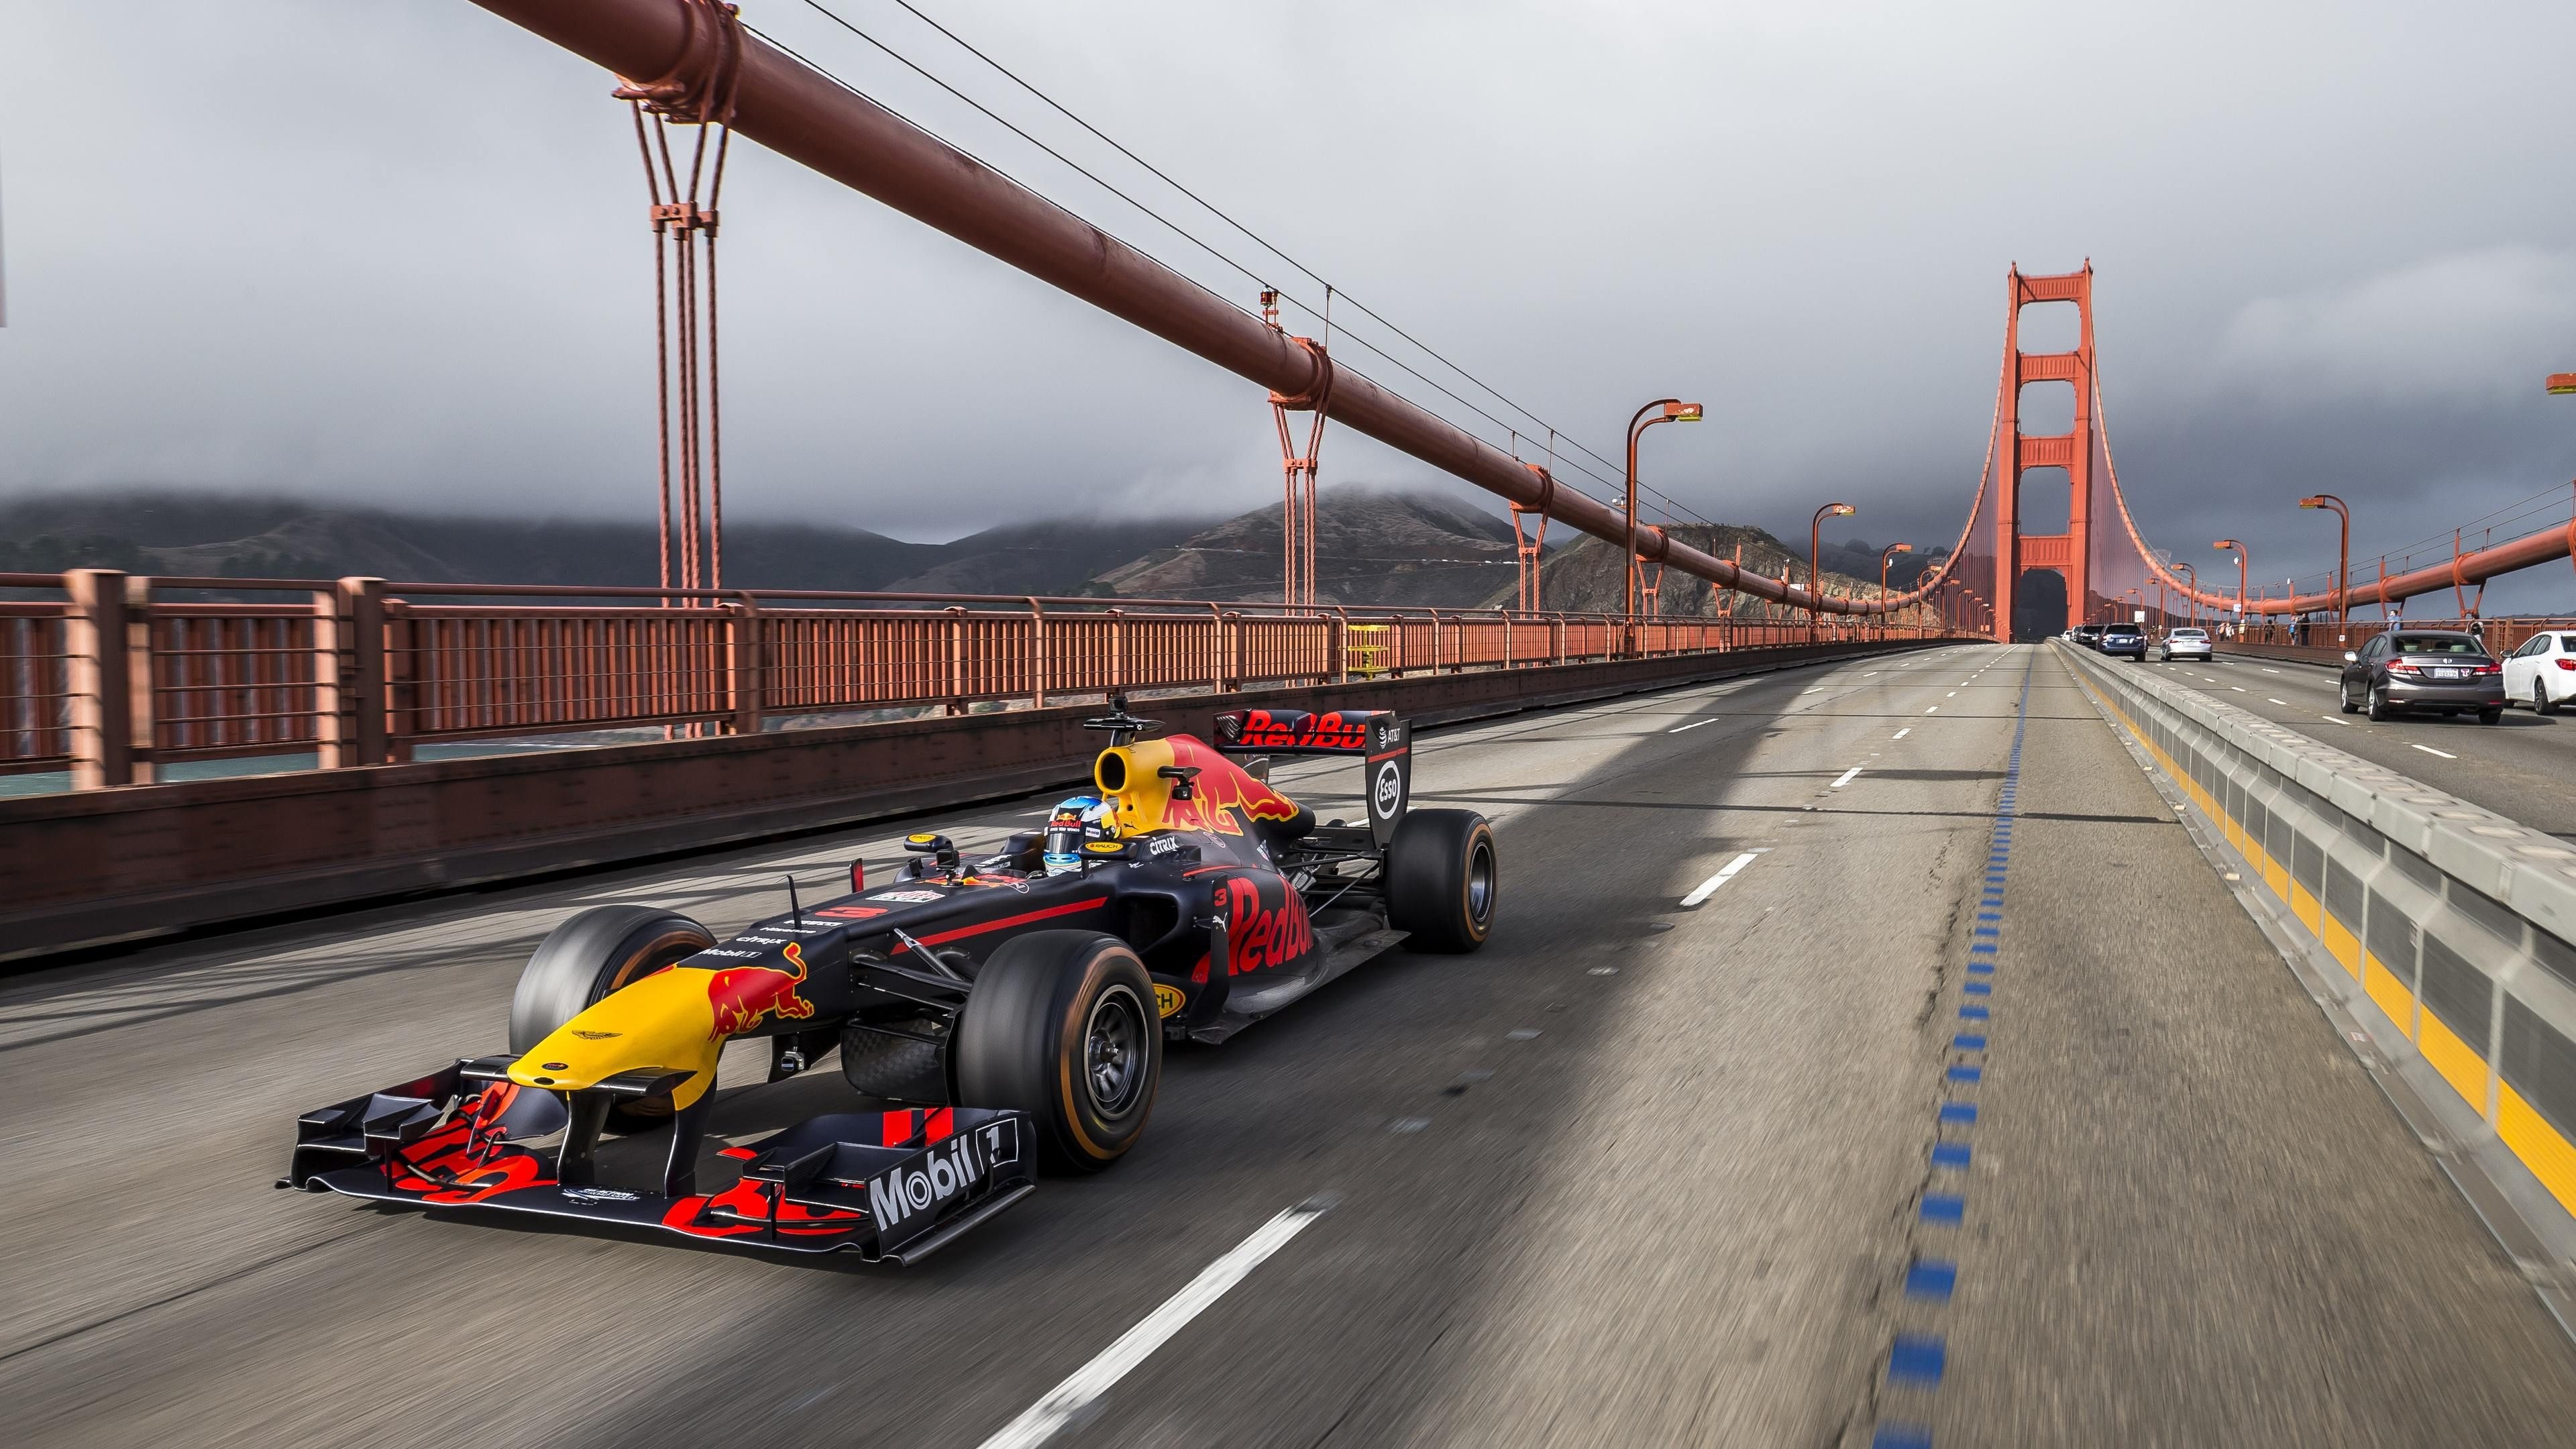 Formula 1: Red Bull RB12, designed by Red Bull Racing to compete in the 2016 F1 season. 3840x2160 4K Wallpaper.